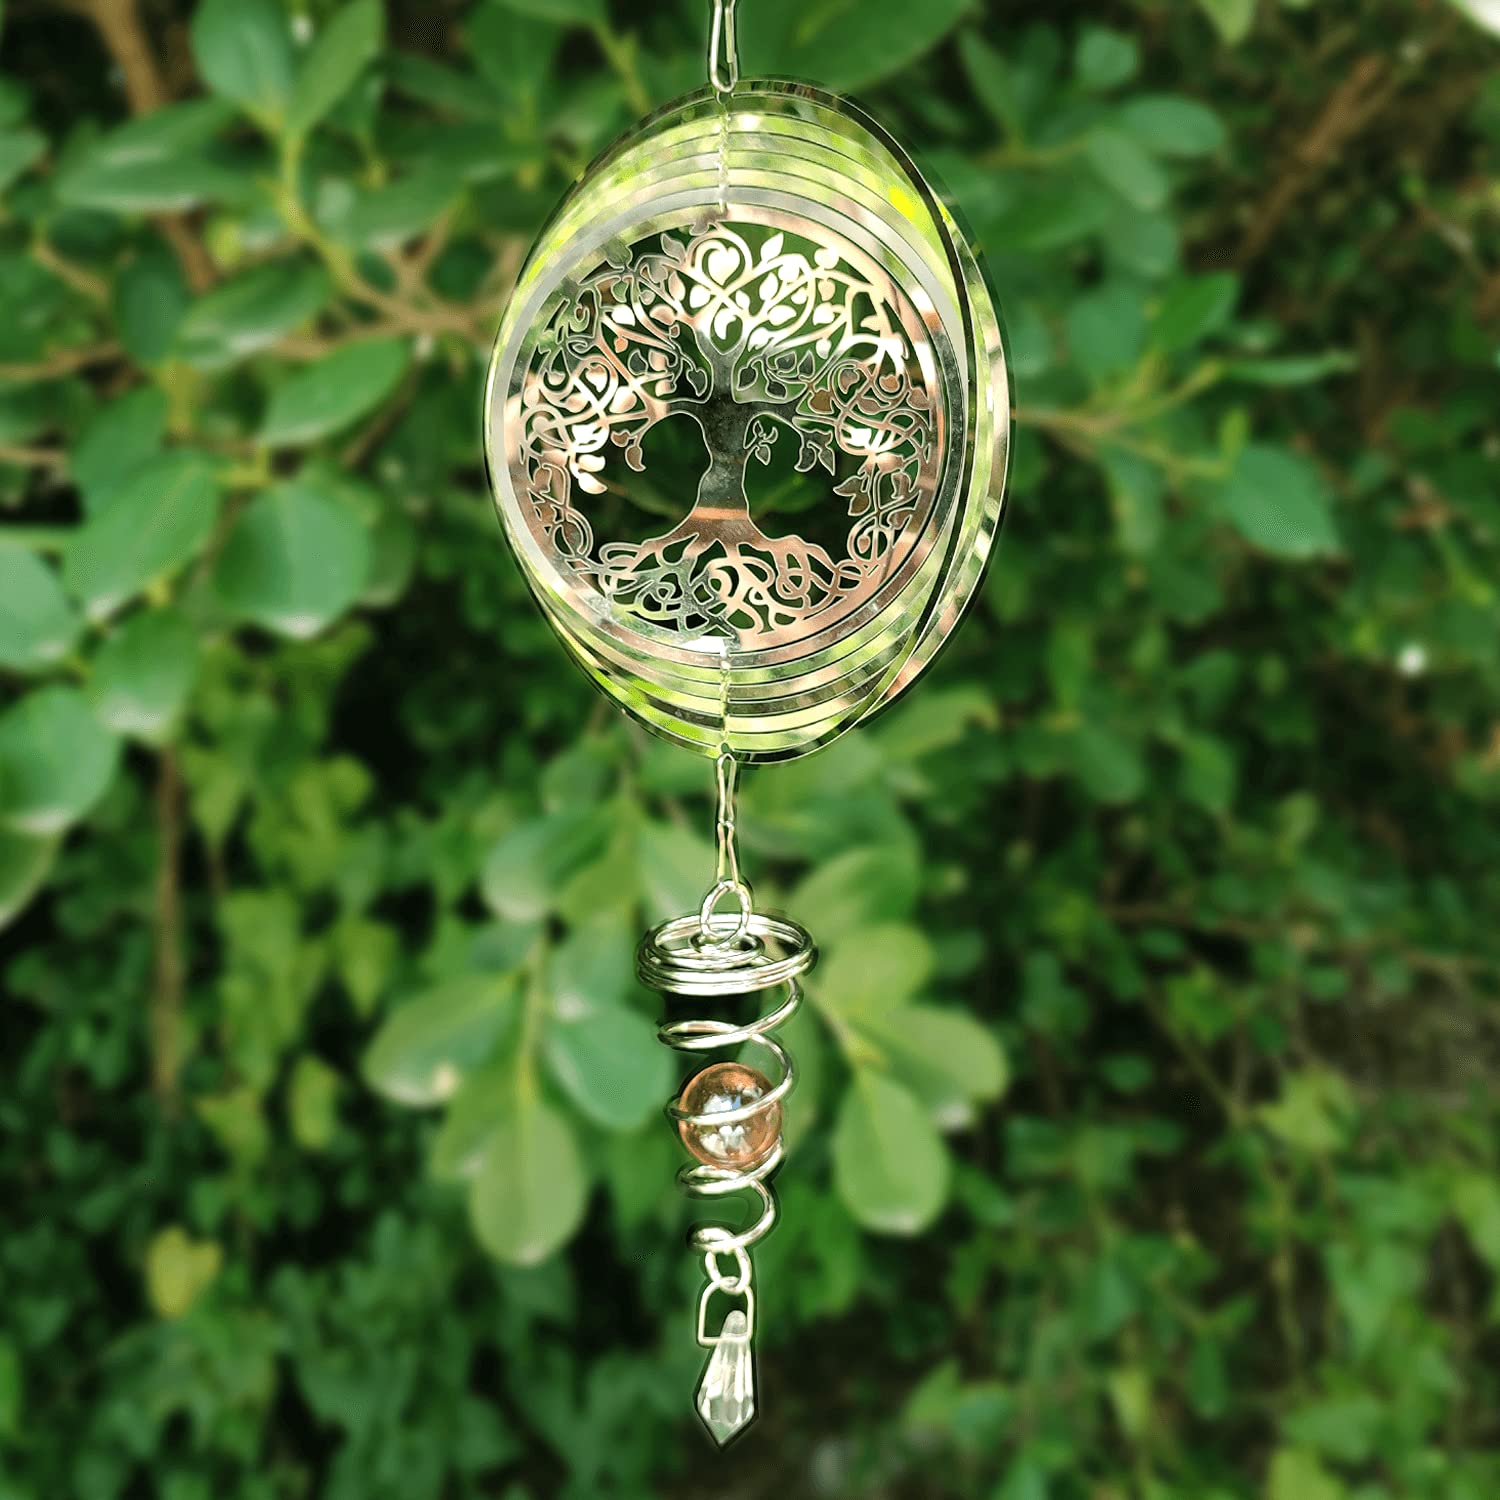 Tree Of Life Wind Spinner With Crystal Suncatcher For Home And Garden Decoration